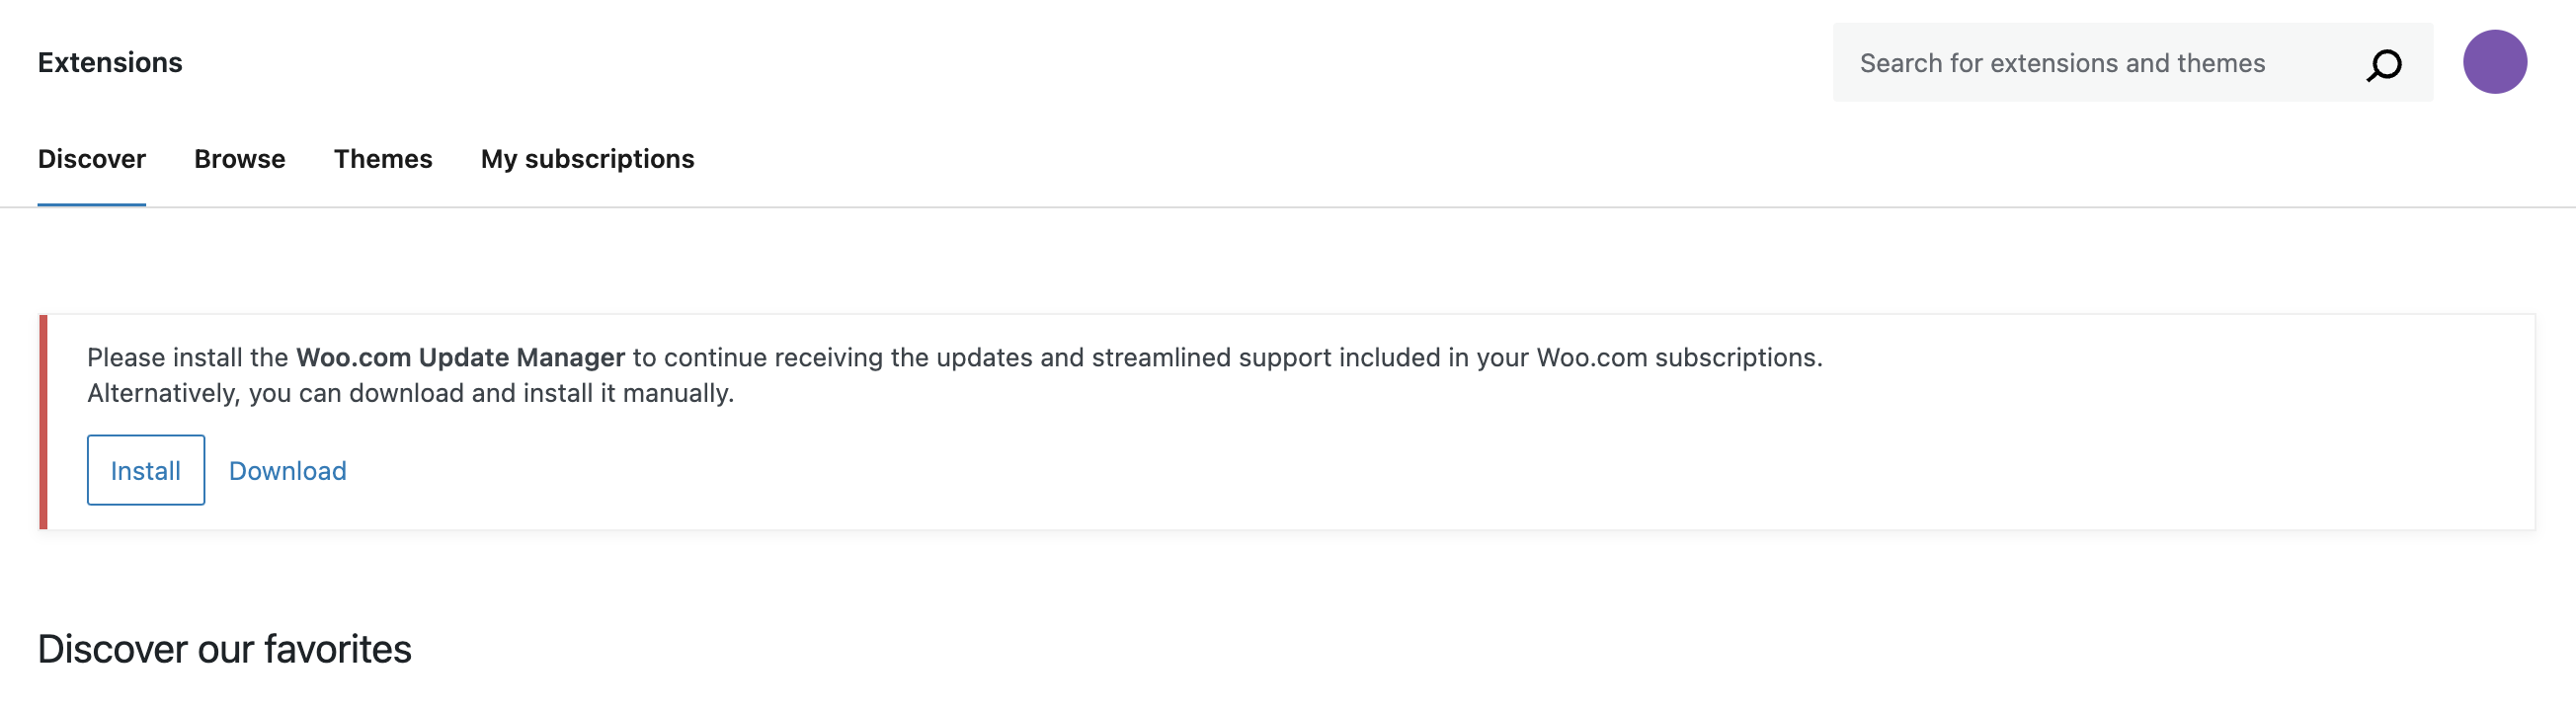 Screenshot of prompt to install the WooCommerce.com Update Manager.